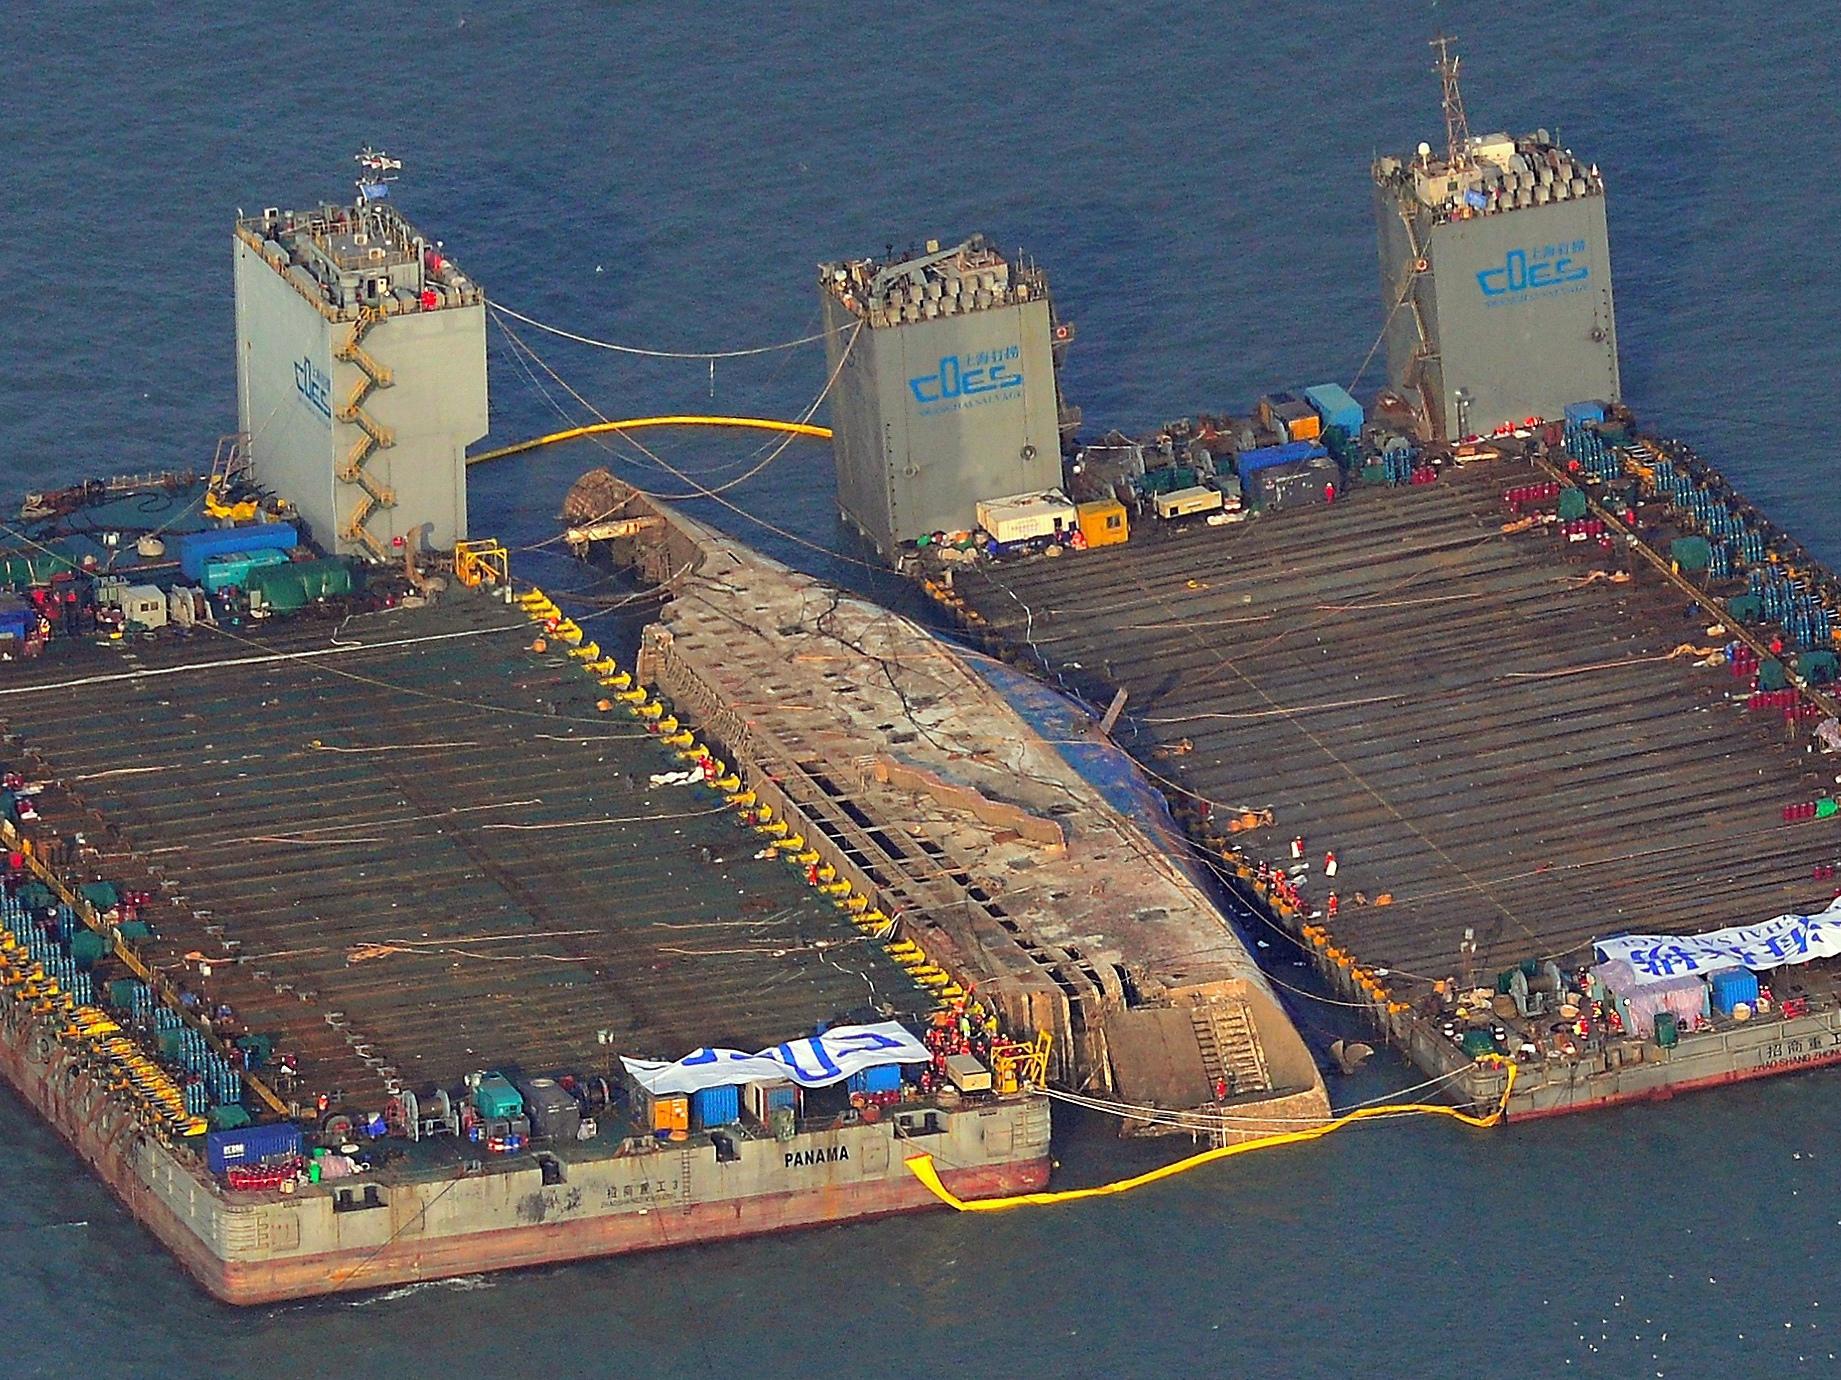 South Korea Tries To Raise Sewol Ferry Nearly 3 Years After Deadly